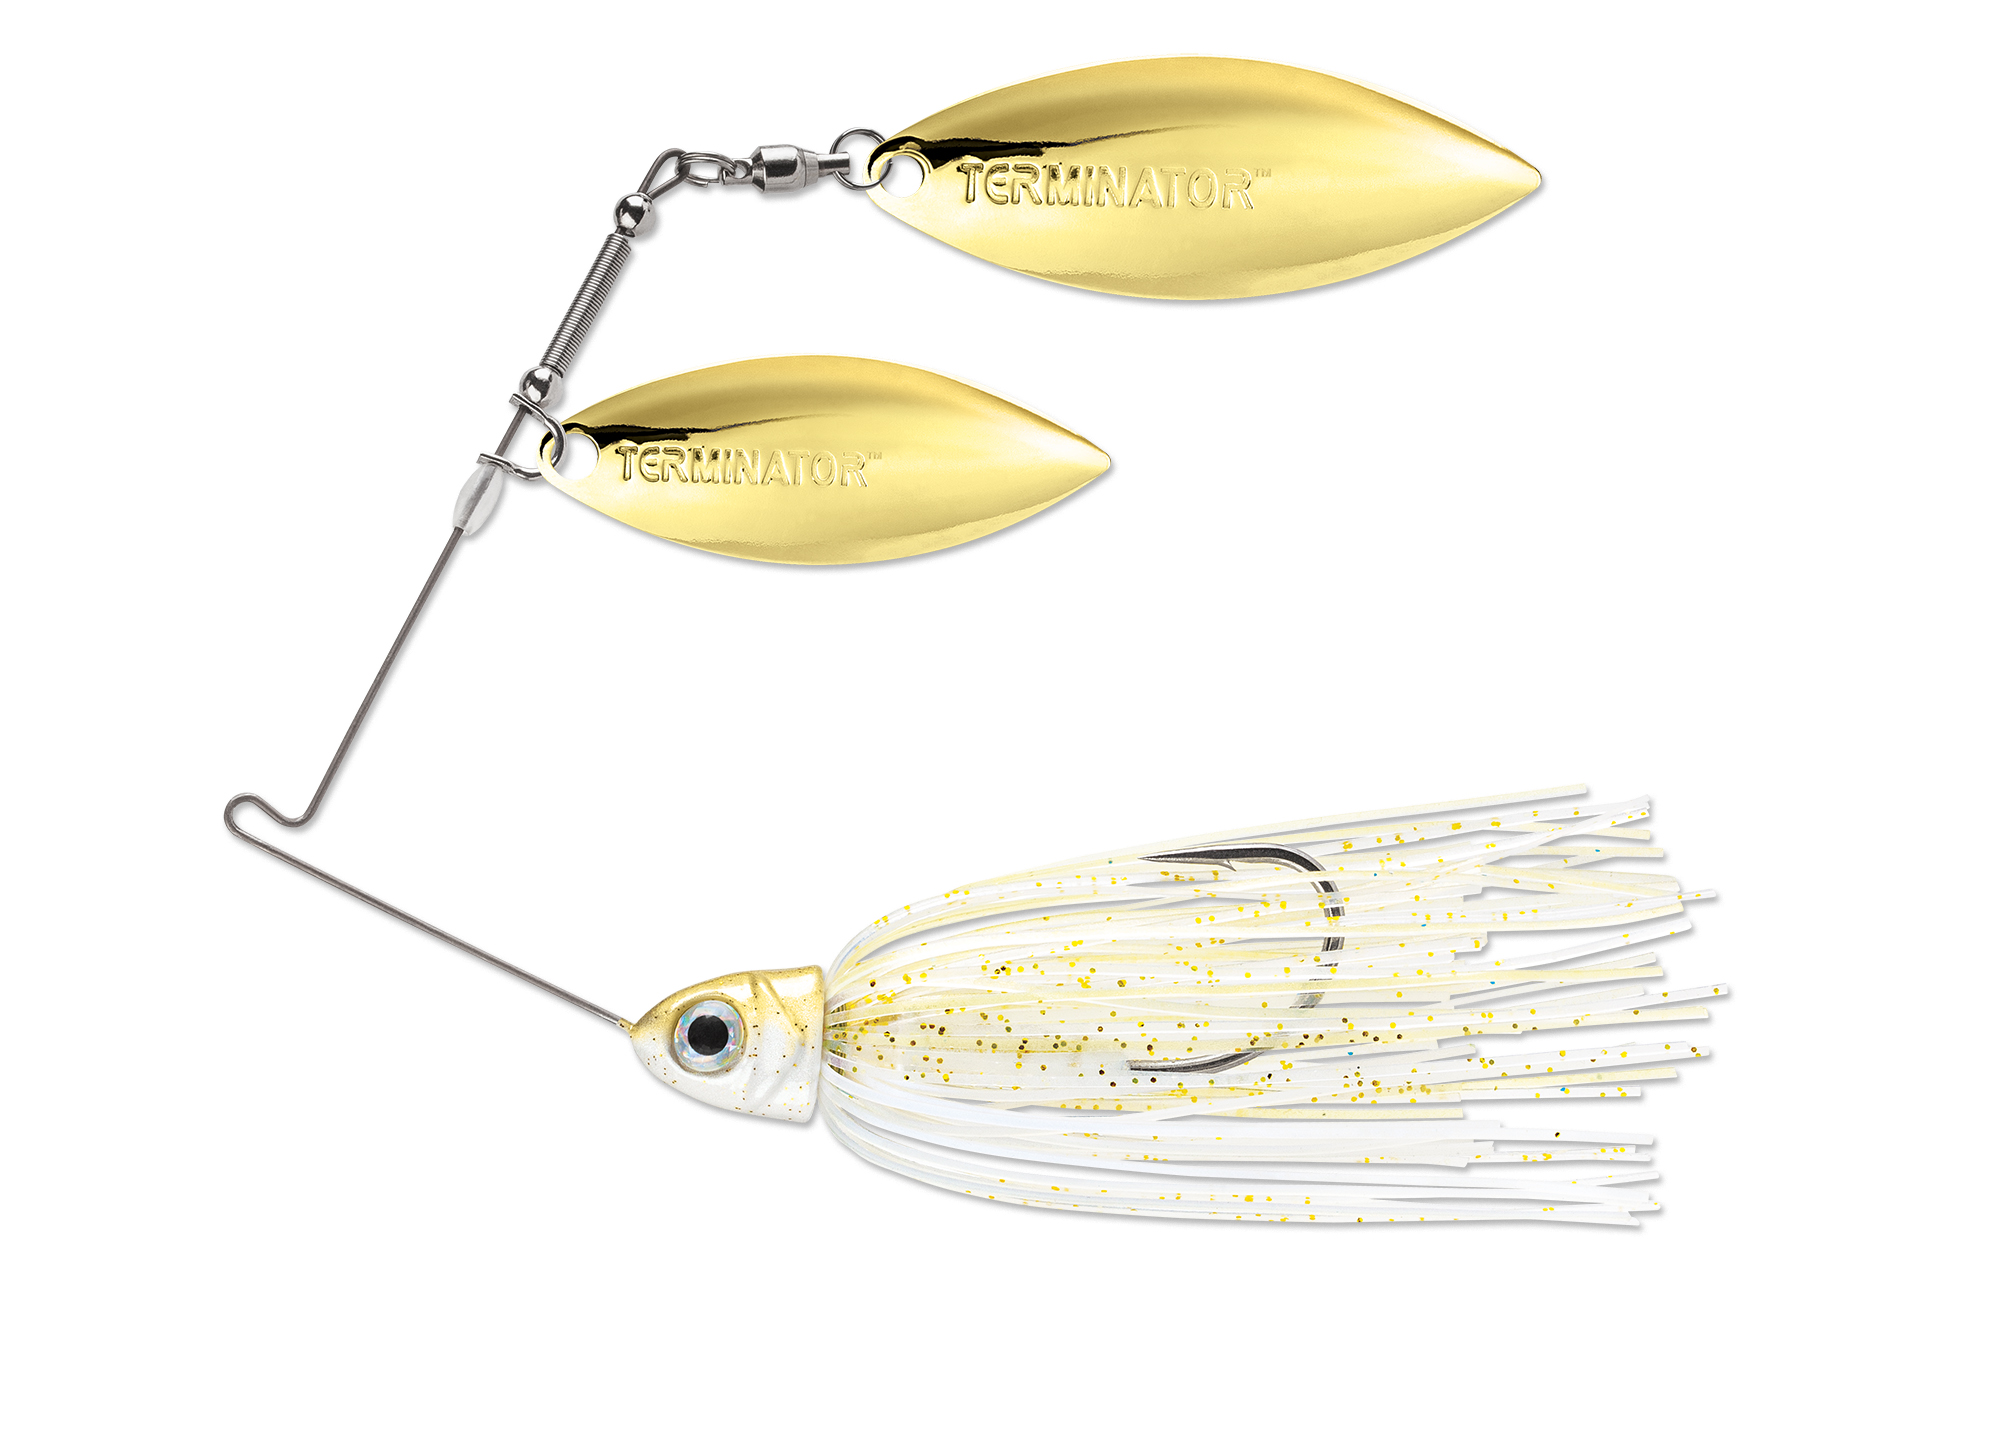 Terminator P1 Pro Series Double Willow Spinnerbait Bass Fishing